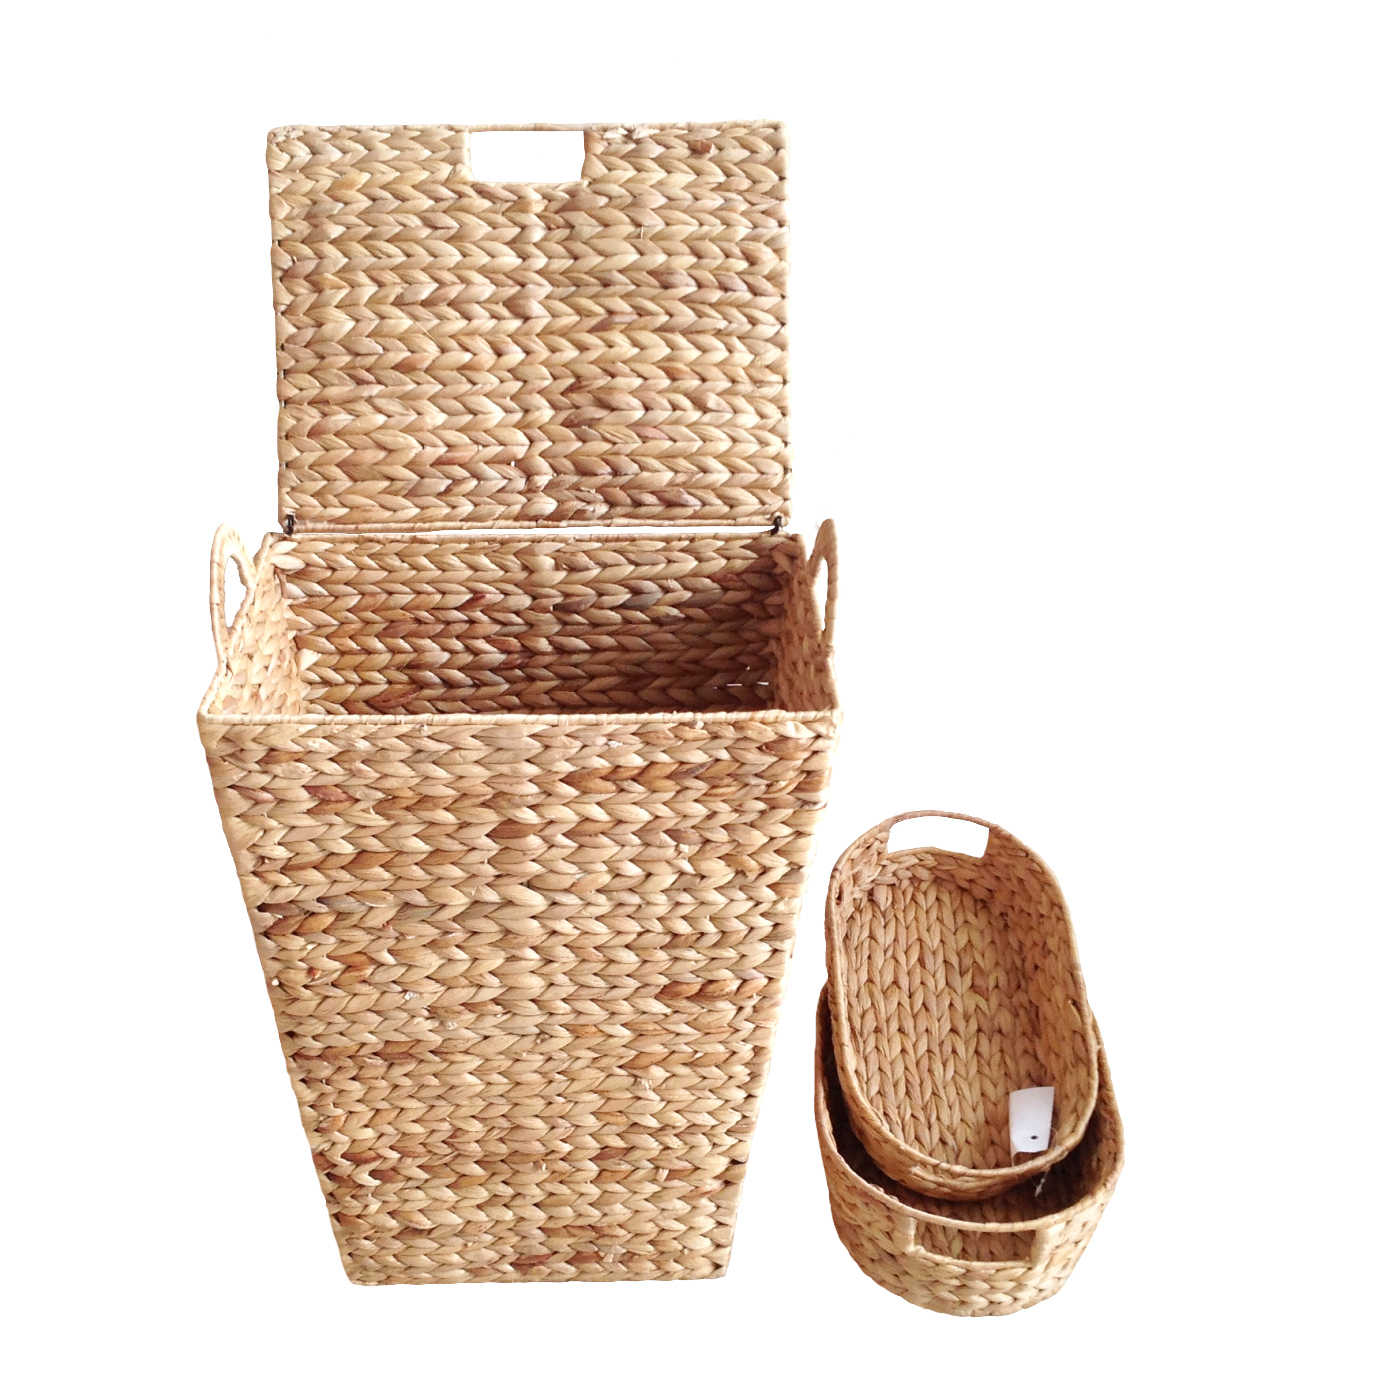 Good Price Rectangular Water Hyacinth Hamper Covered With Lids And 2 Small Baskets Handles On Both Sides Are Easy To Move